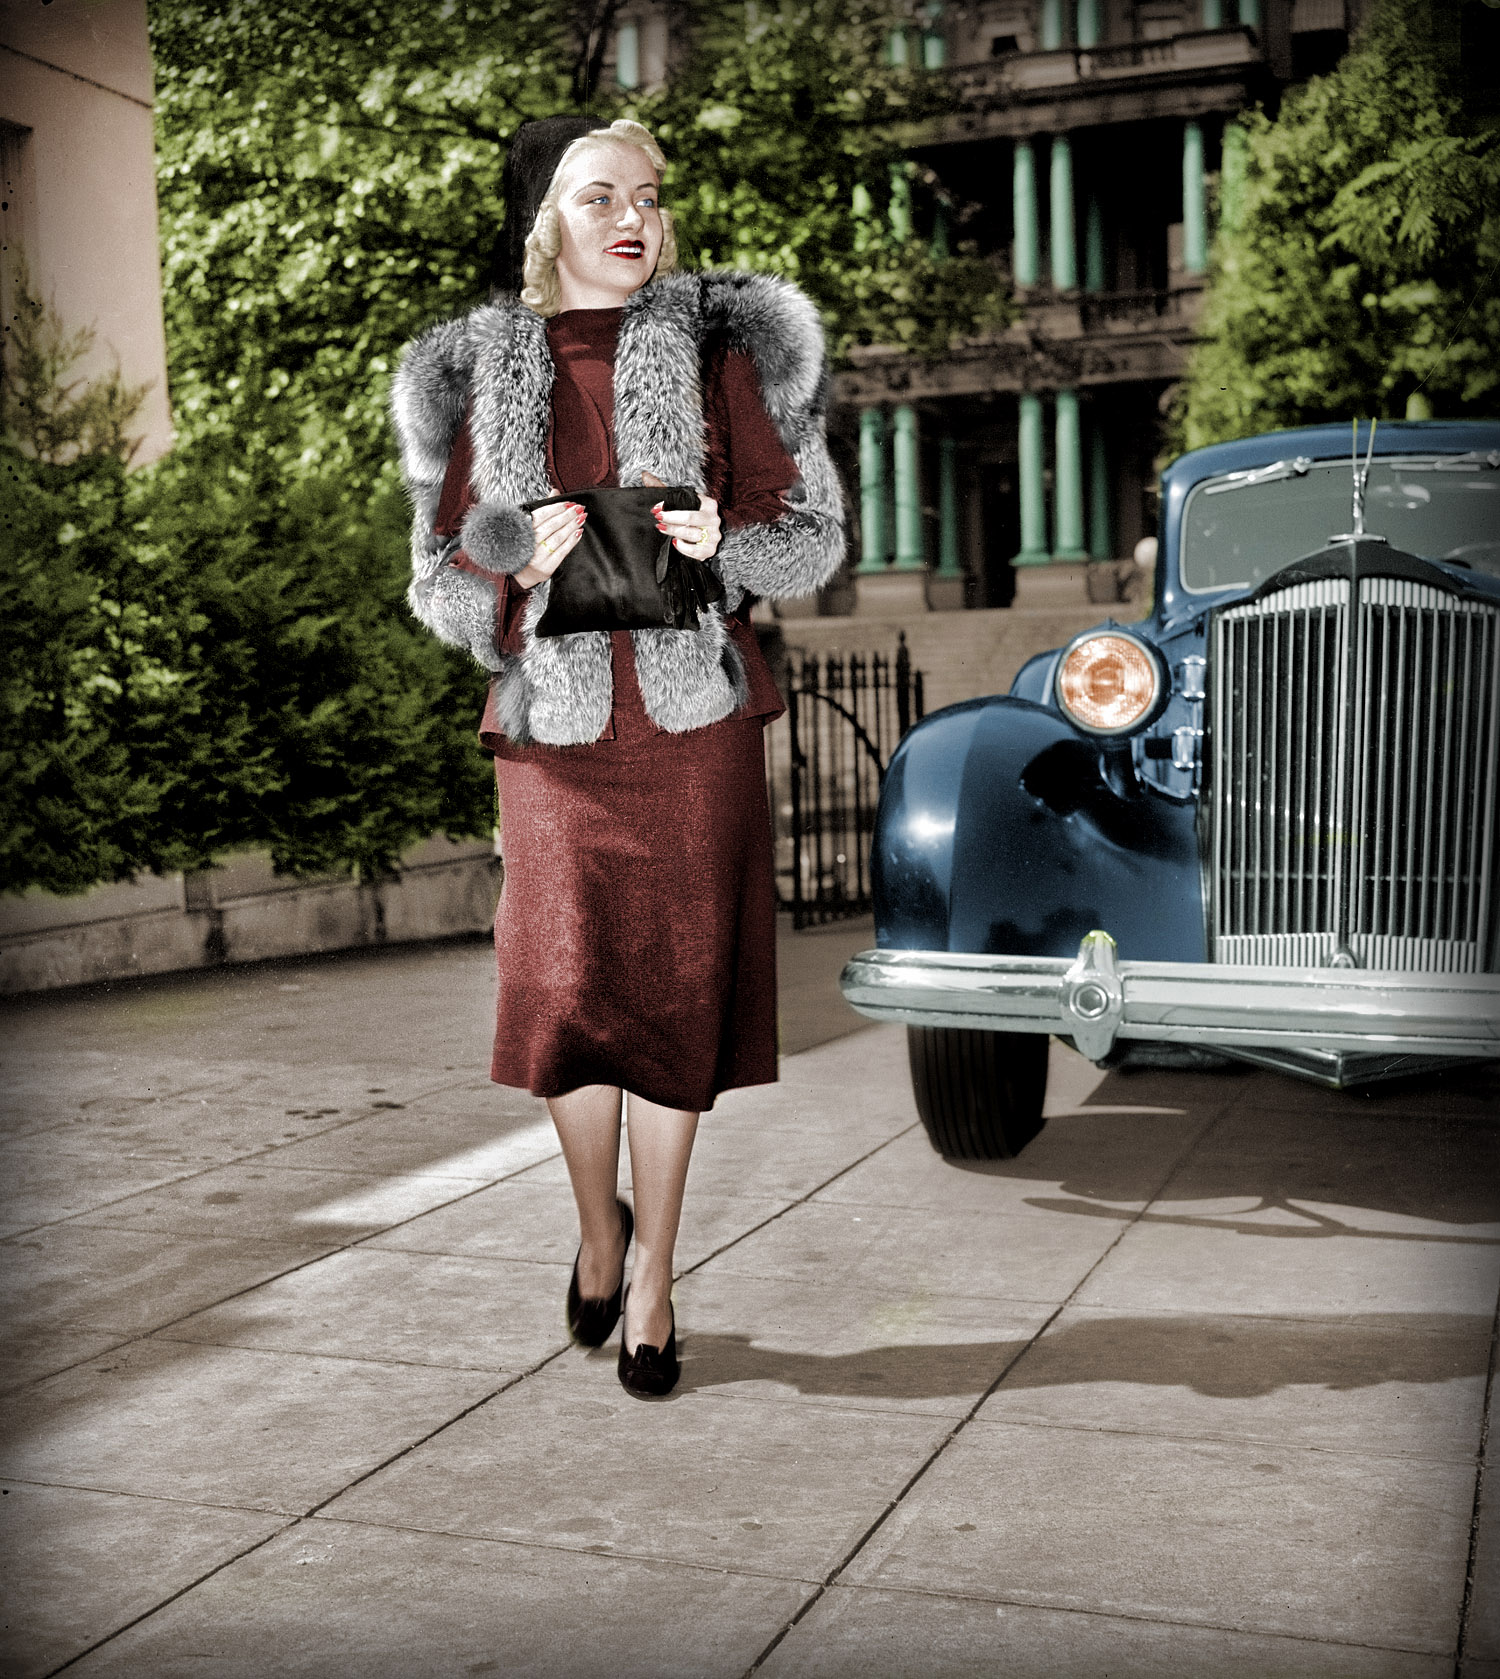 Washington, D.C., circa 1937. "Jane Grier." Pictured with a Packard near the old State, War and Navy building. Harris & Ewing Collection. View full size.